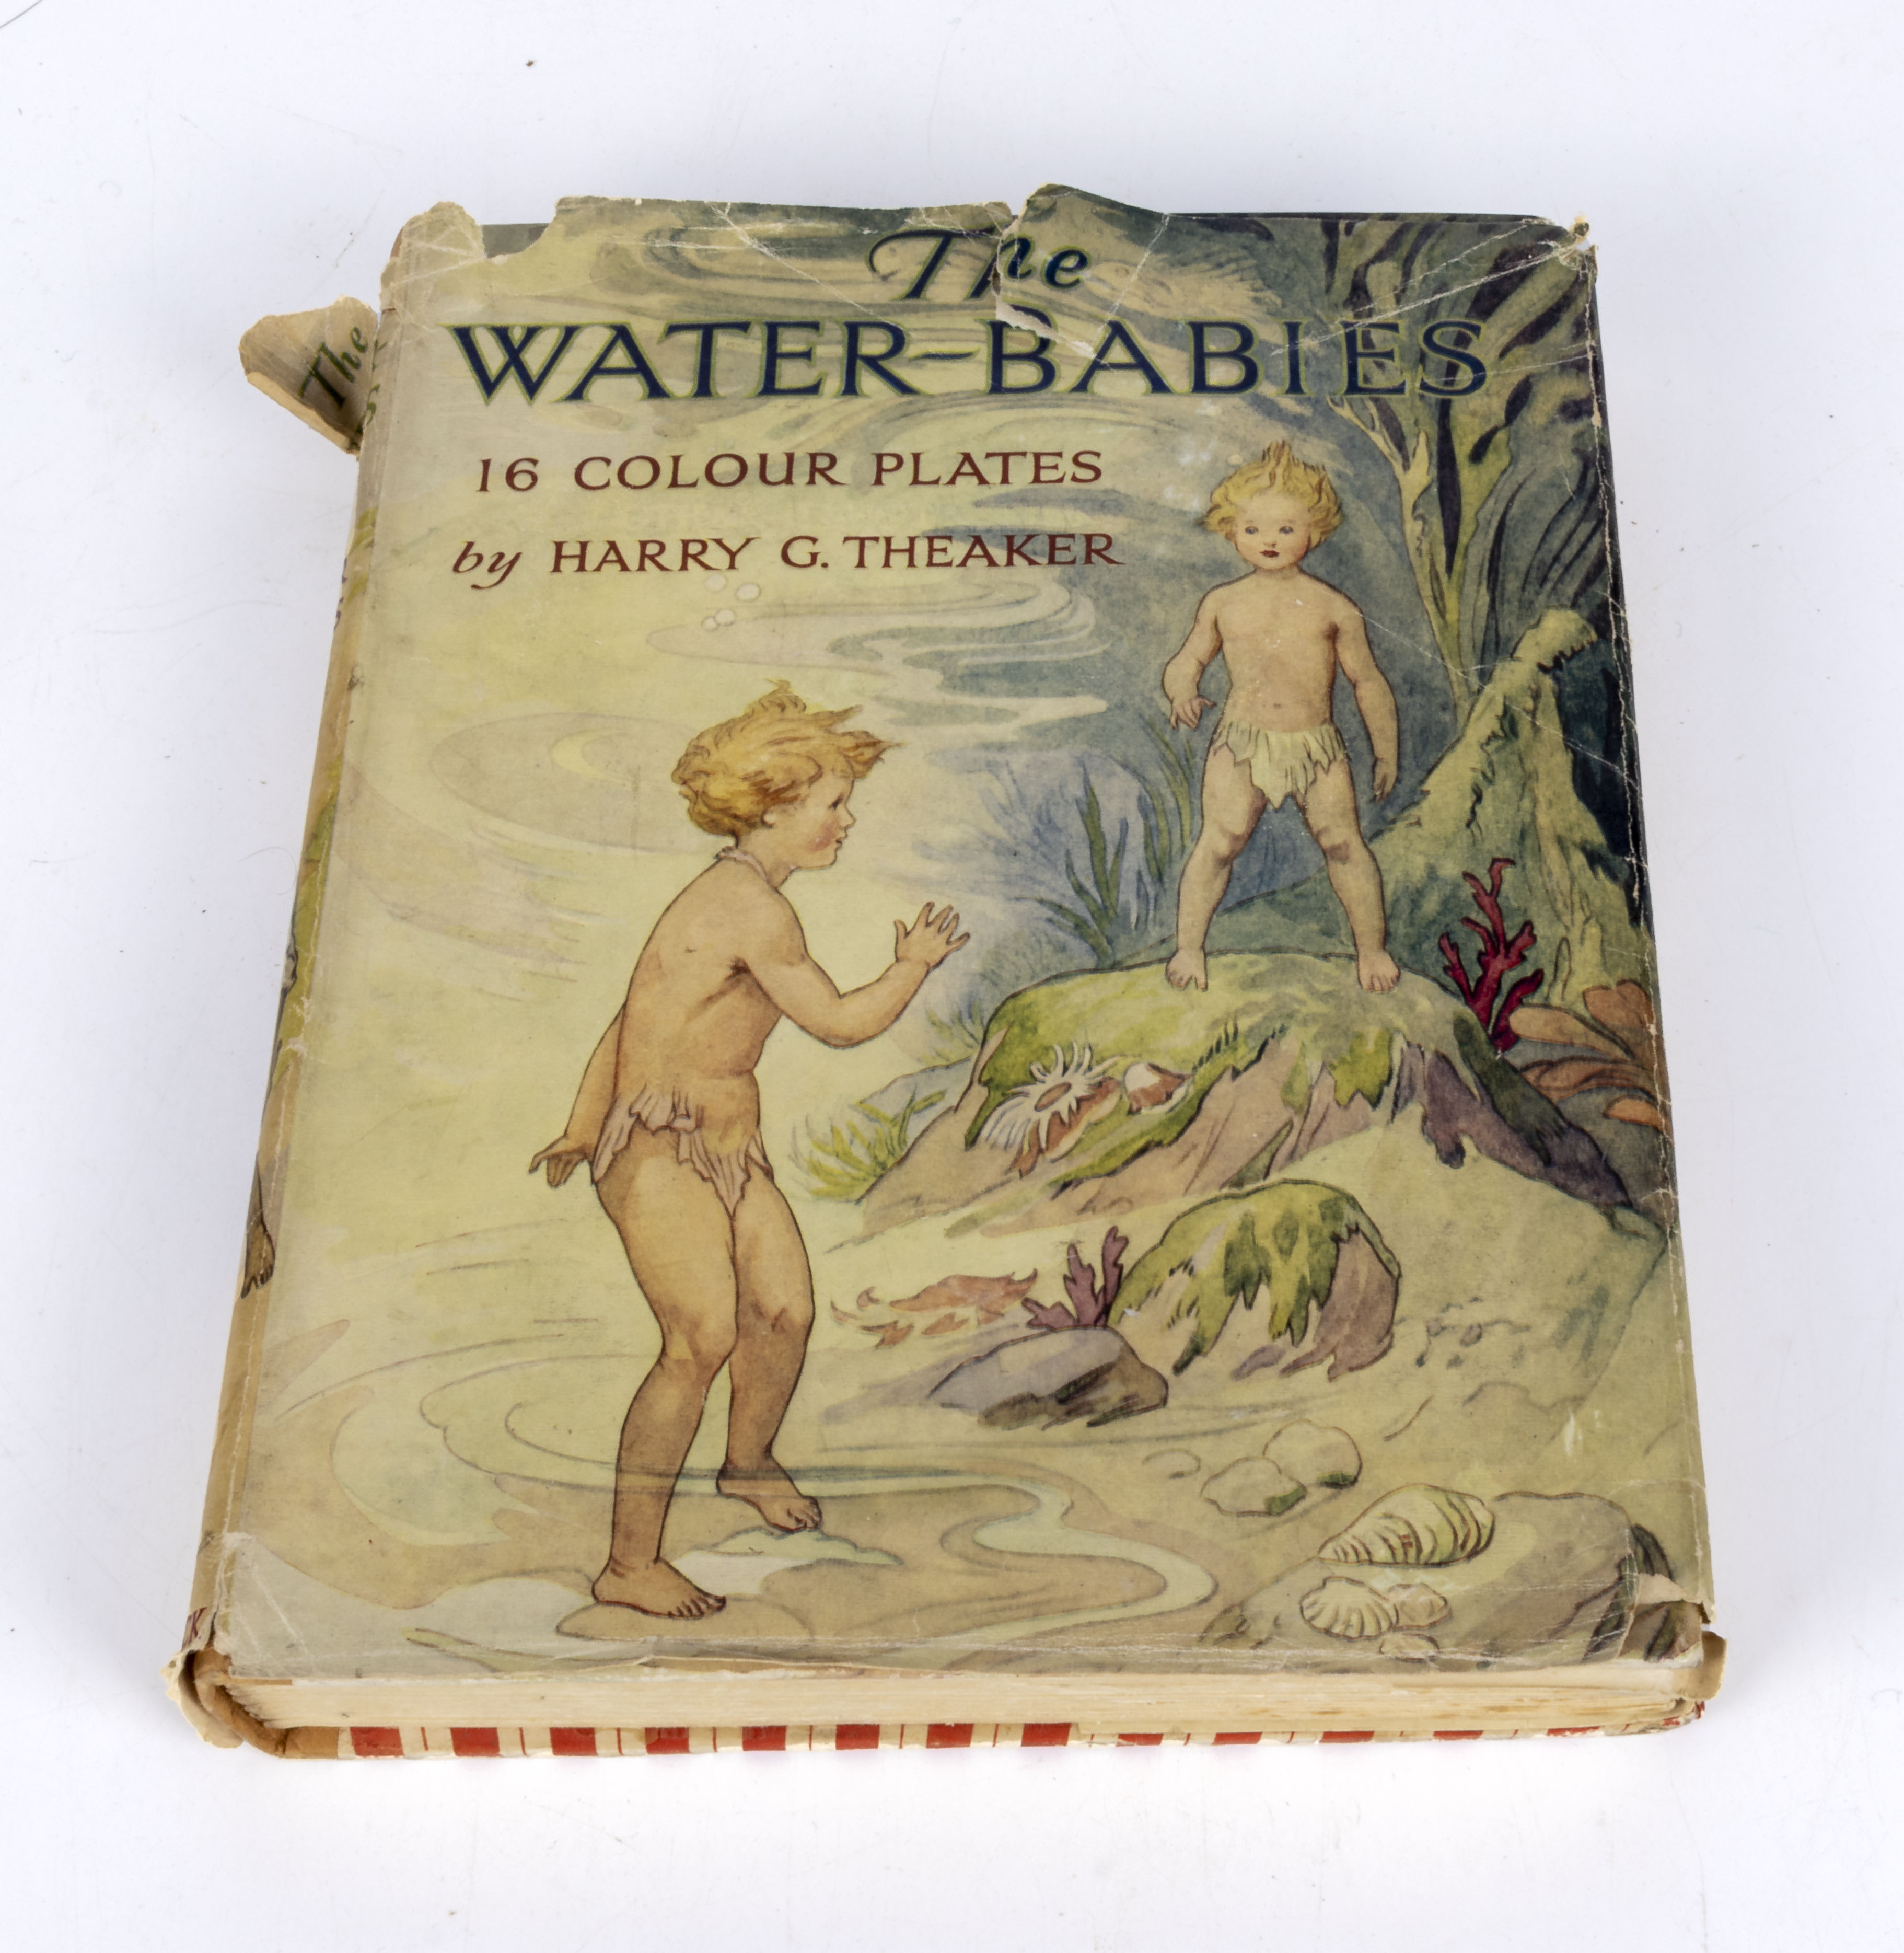 An edition of The Water Babies by Charles Kingsley, including 16 coloured plates by Harry G Theaker, - Image 2 of 6